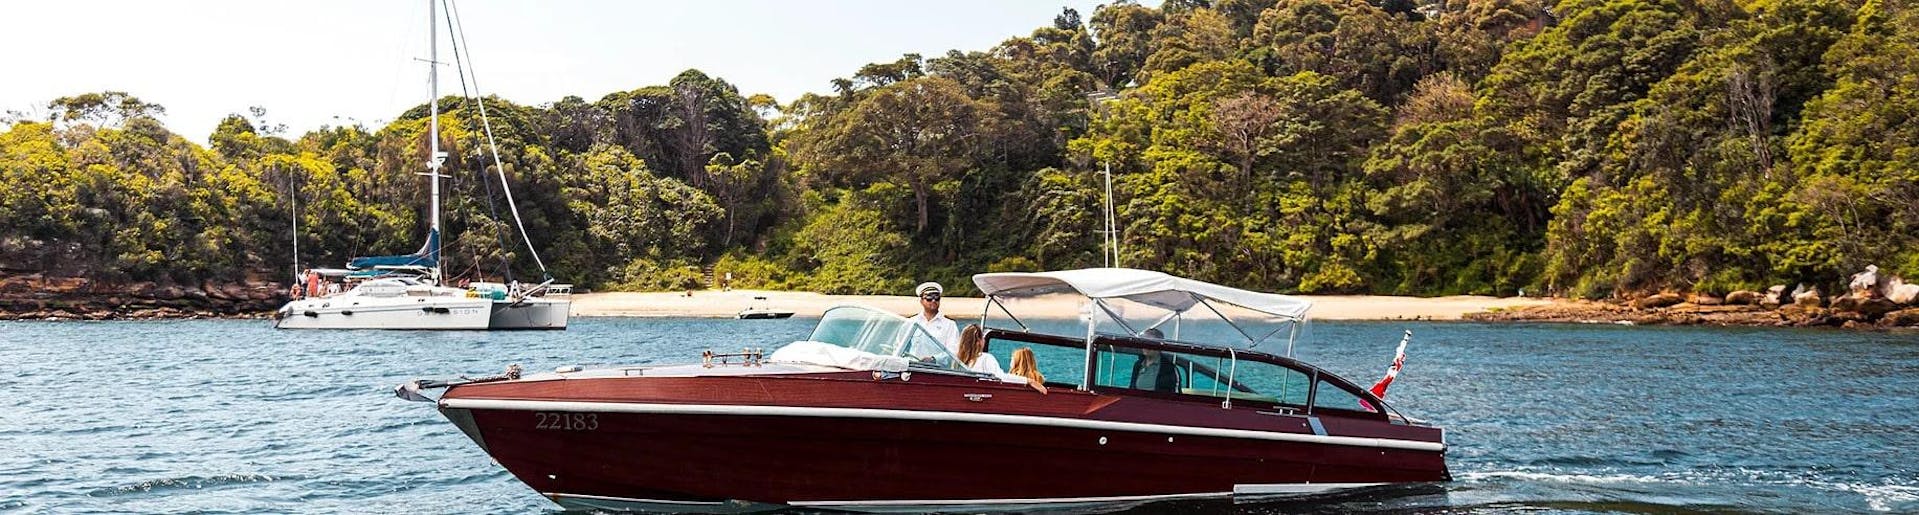 During the Private Luxury Boat Cruise in Sydney to Hidden National Park, tourists are relaxing aboard of hybrid electric vessel from Sydney Luxury Cruise.